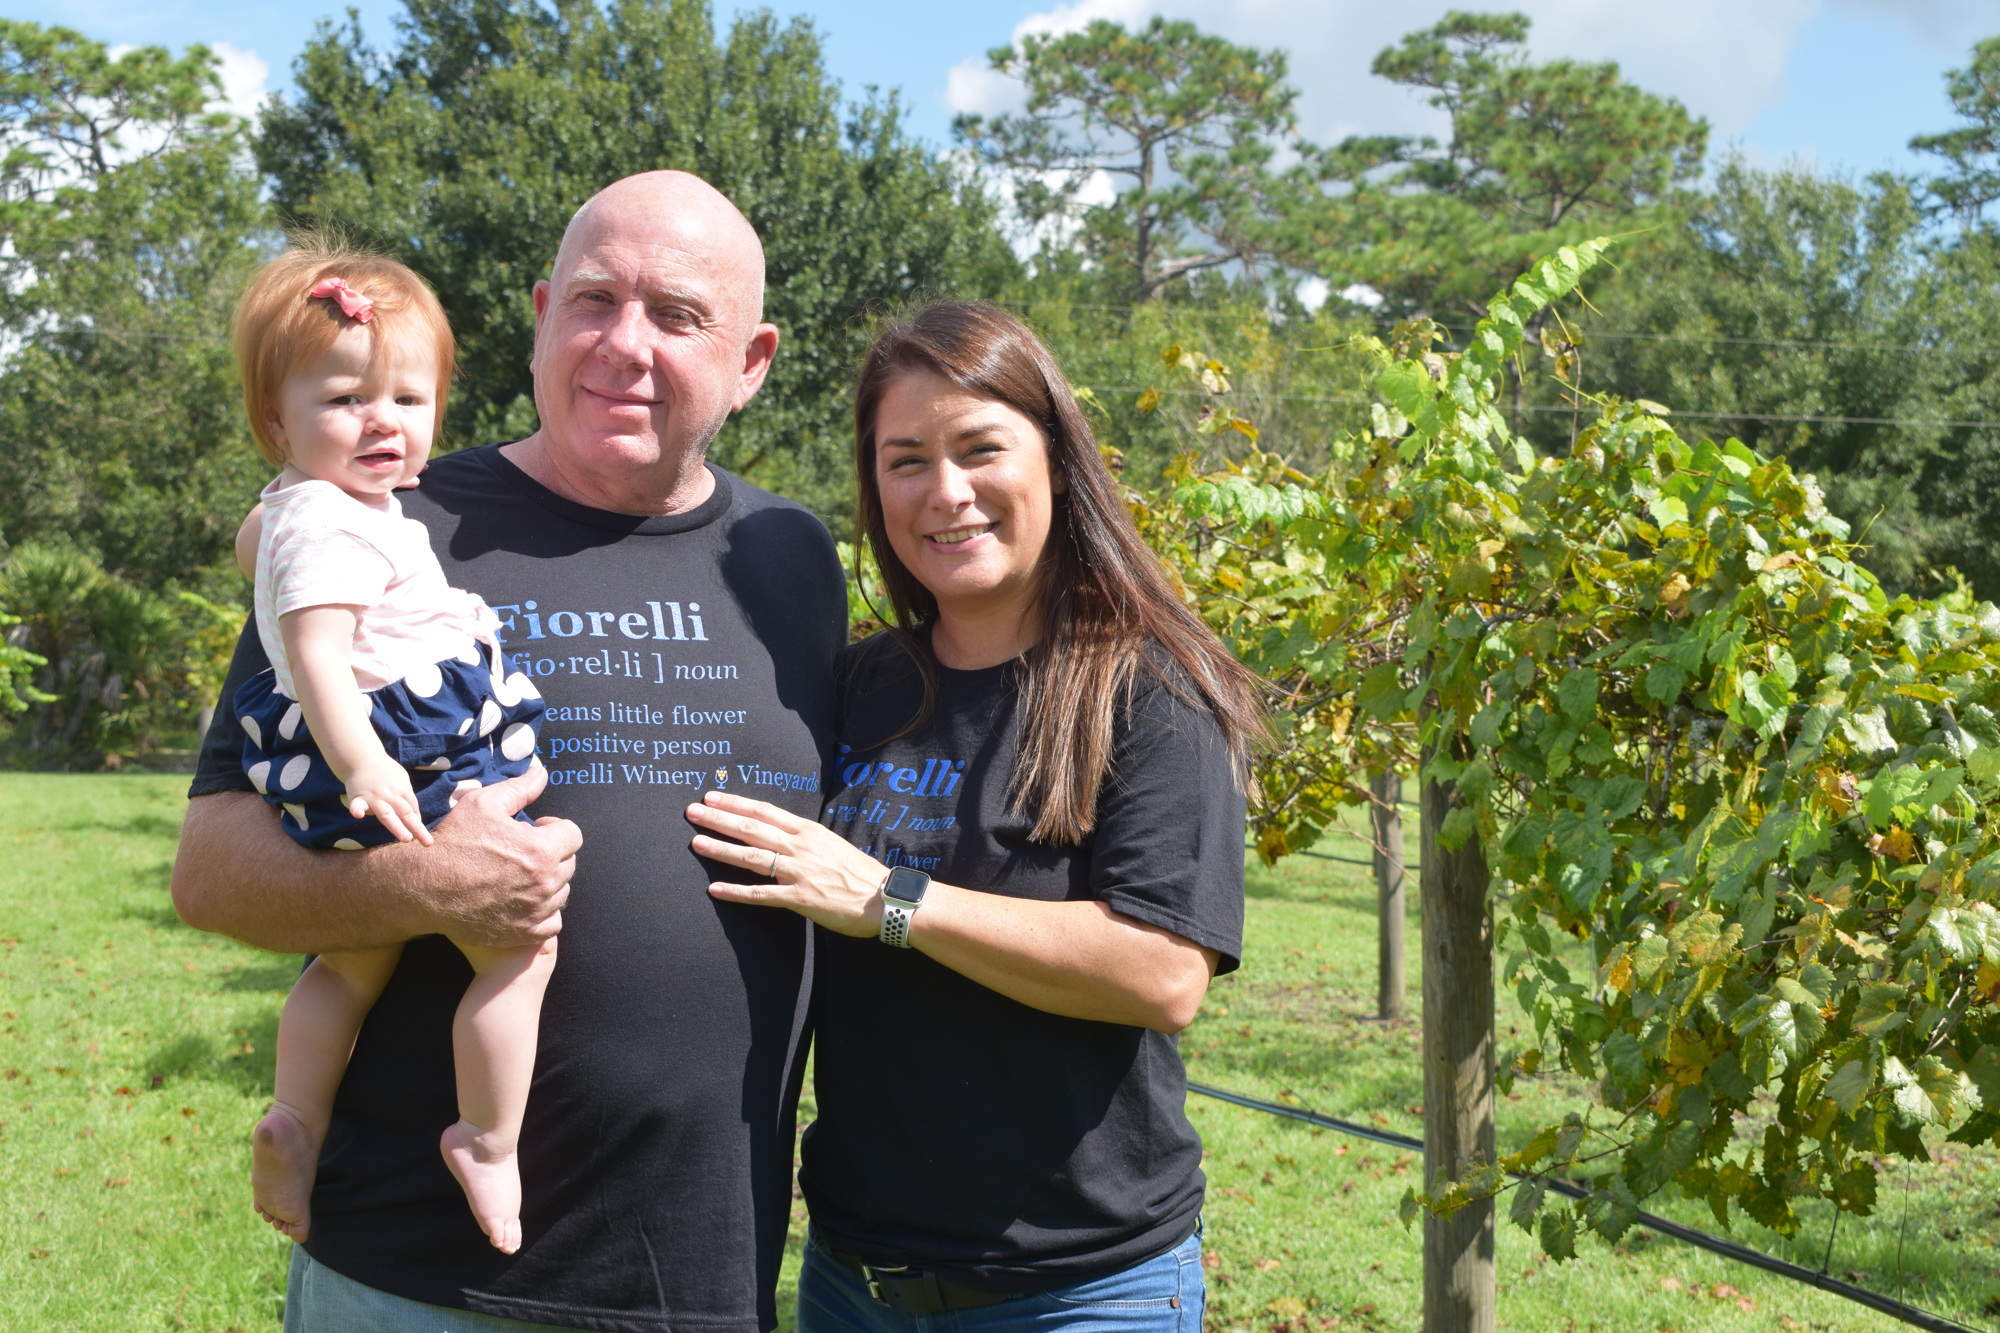 John and Kristin Hokanson hope to build on the legacy of Fiorelli Winery and Vineyard for their daughter, Madison.